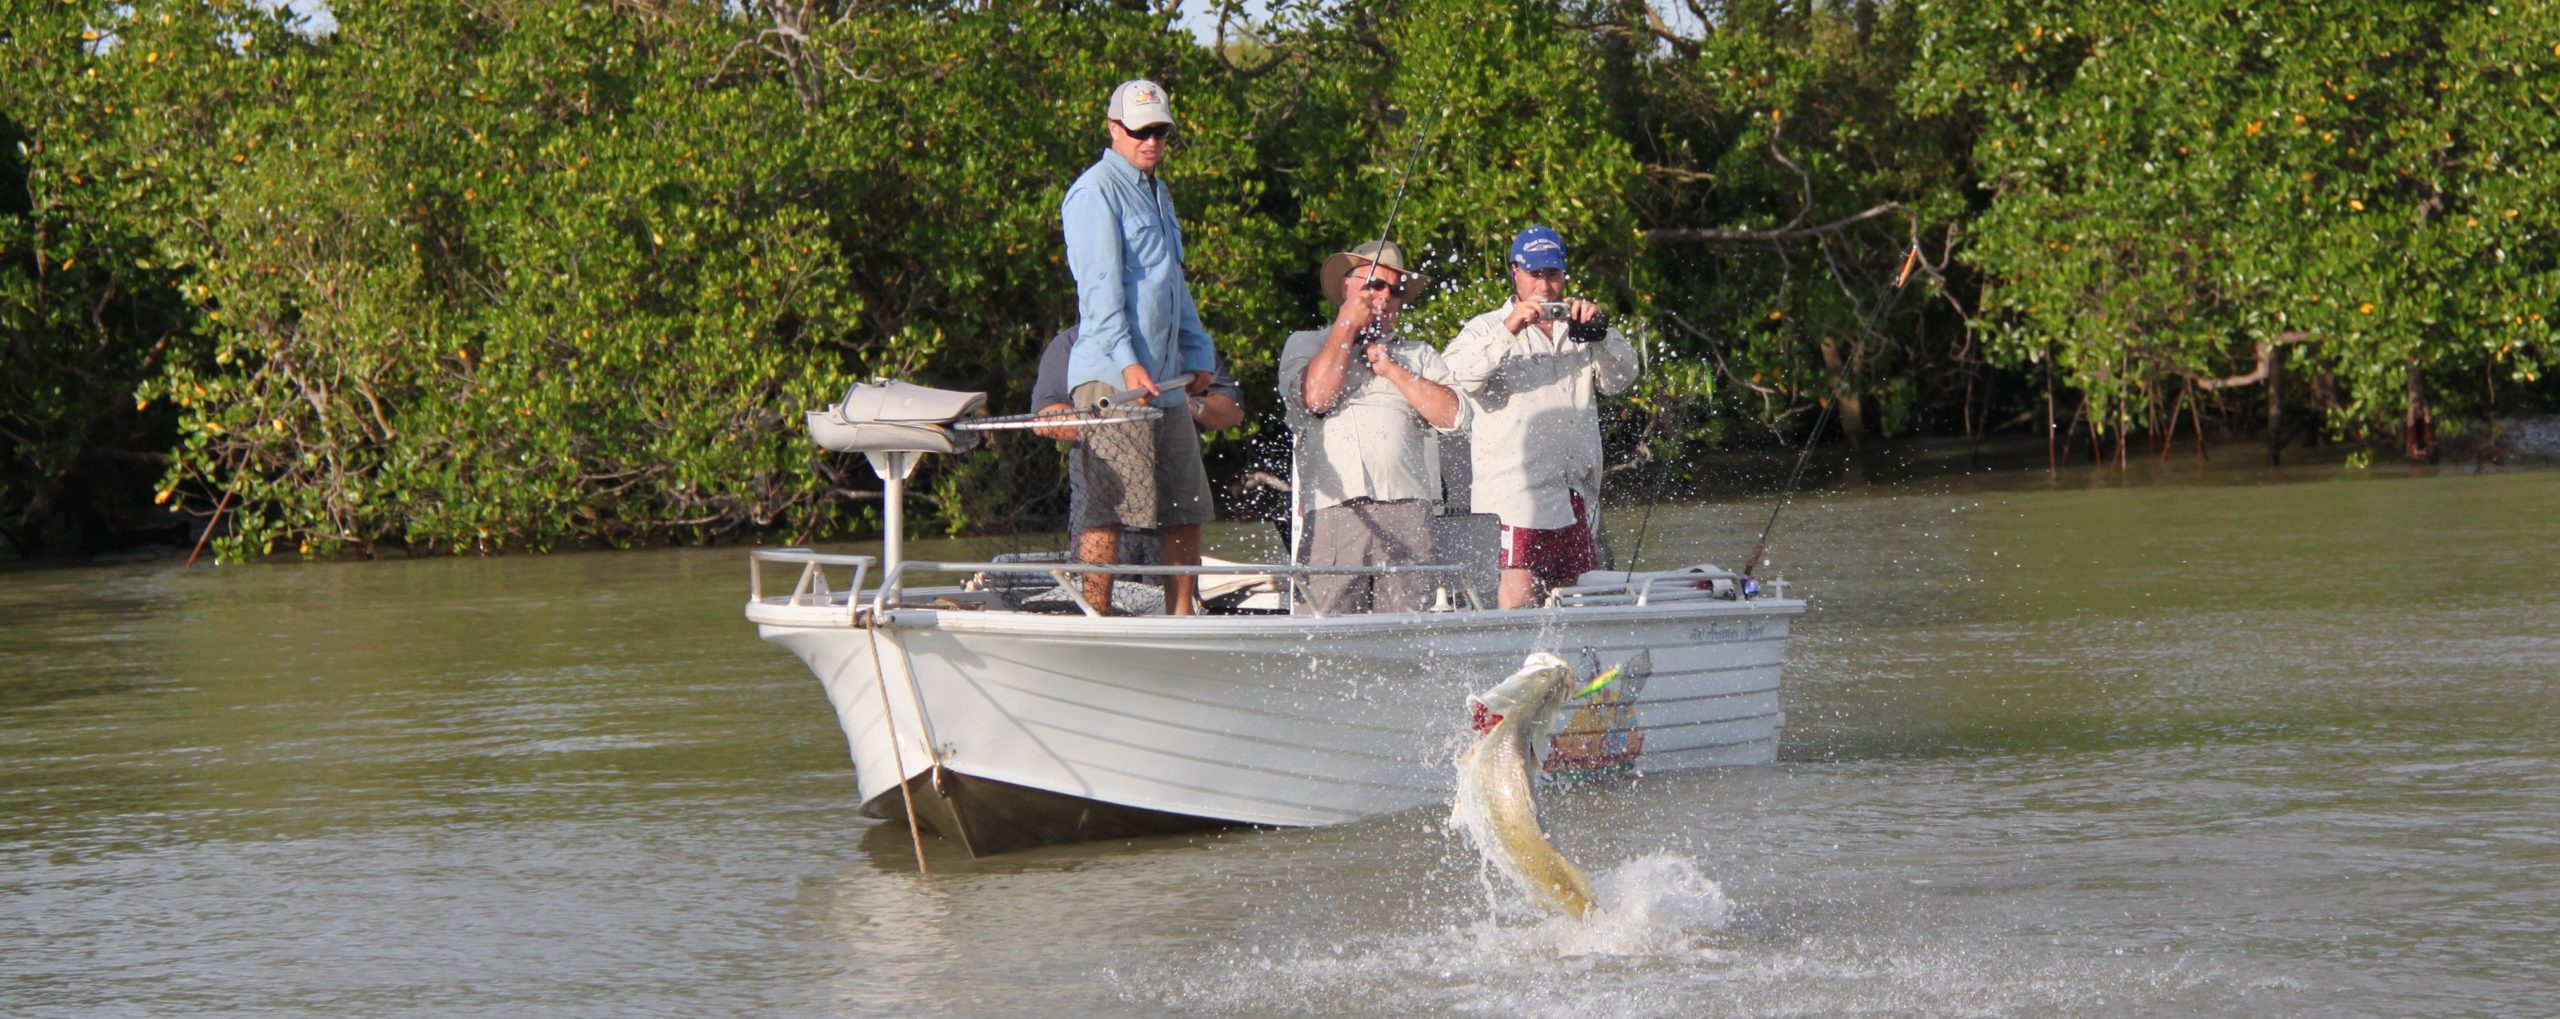 Group of people fishing for barramundi from a boat